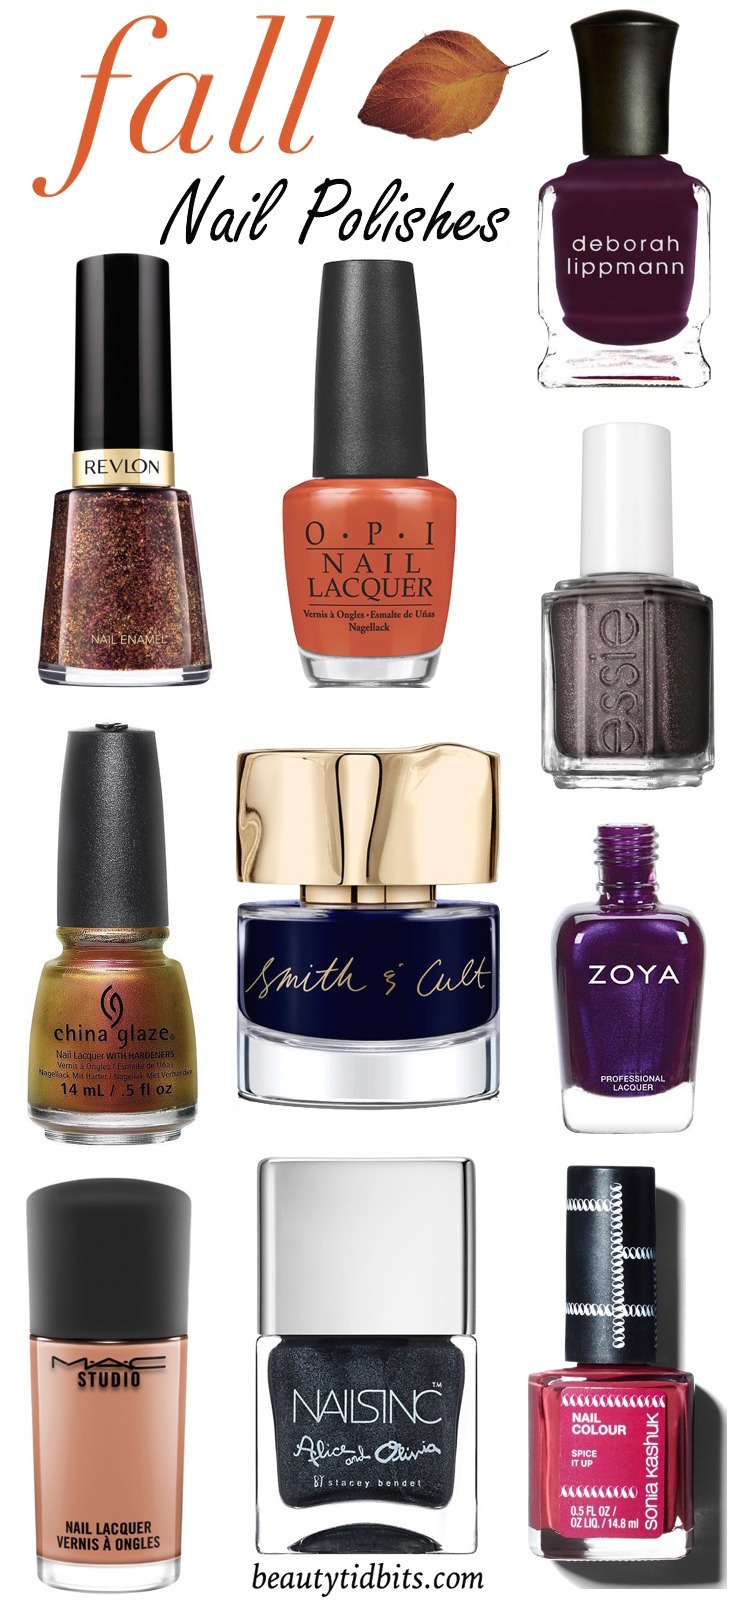 Step up your fall manicure game with these pretty polishes perfectly primed to the changing season!